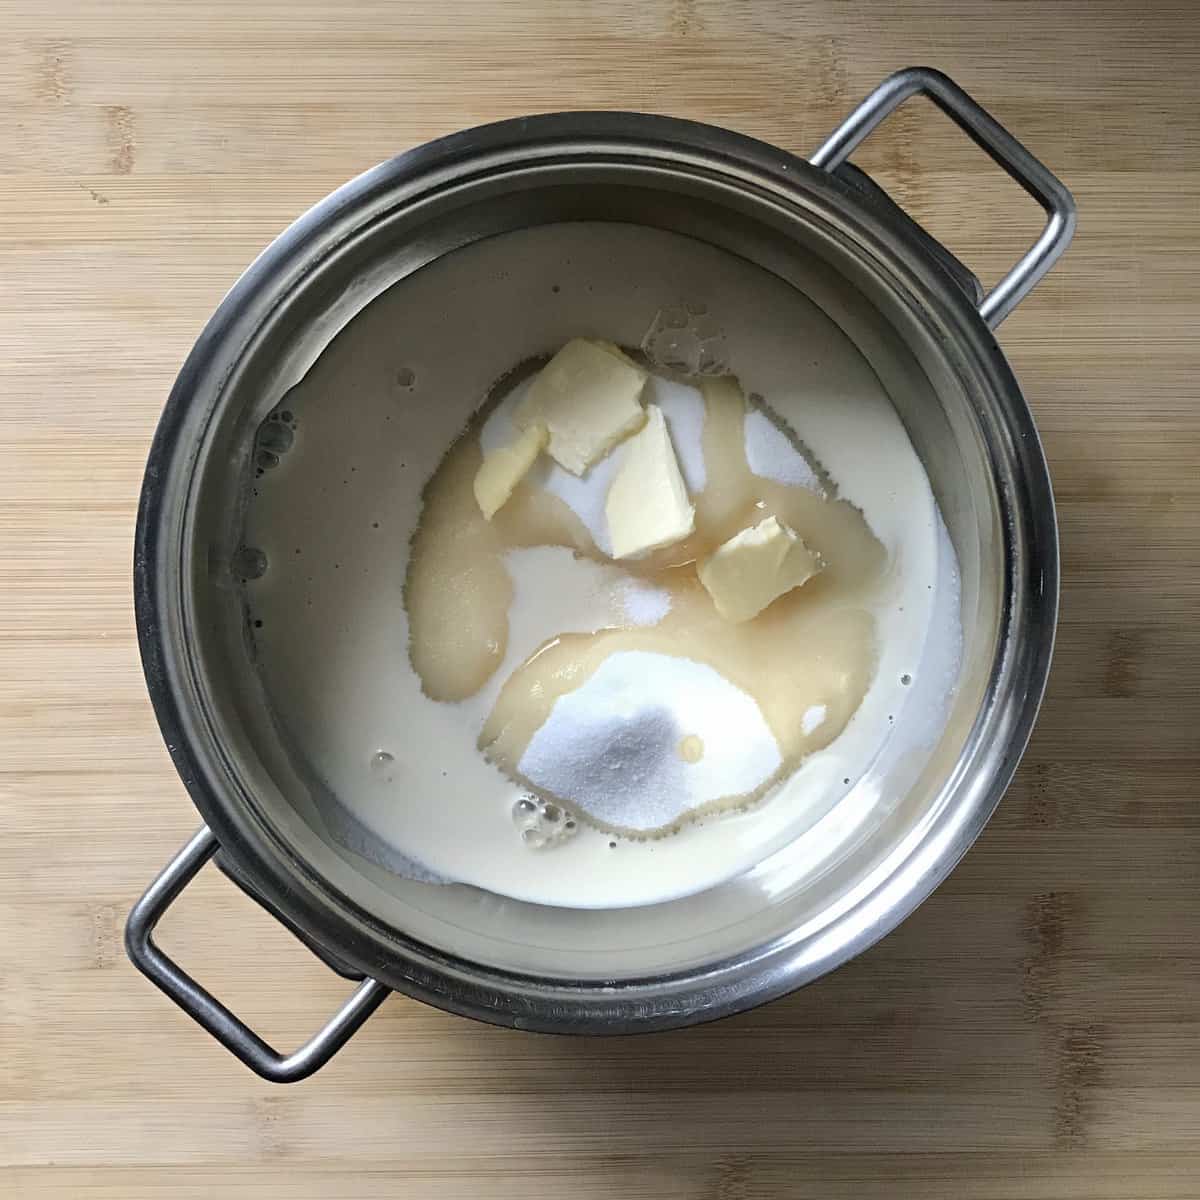 Evaporated milk, sugar and butter in a saucepan.